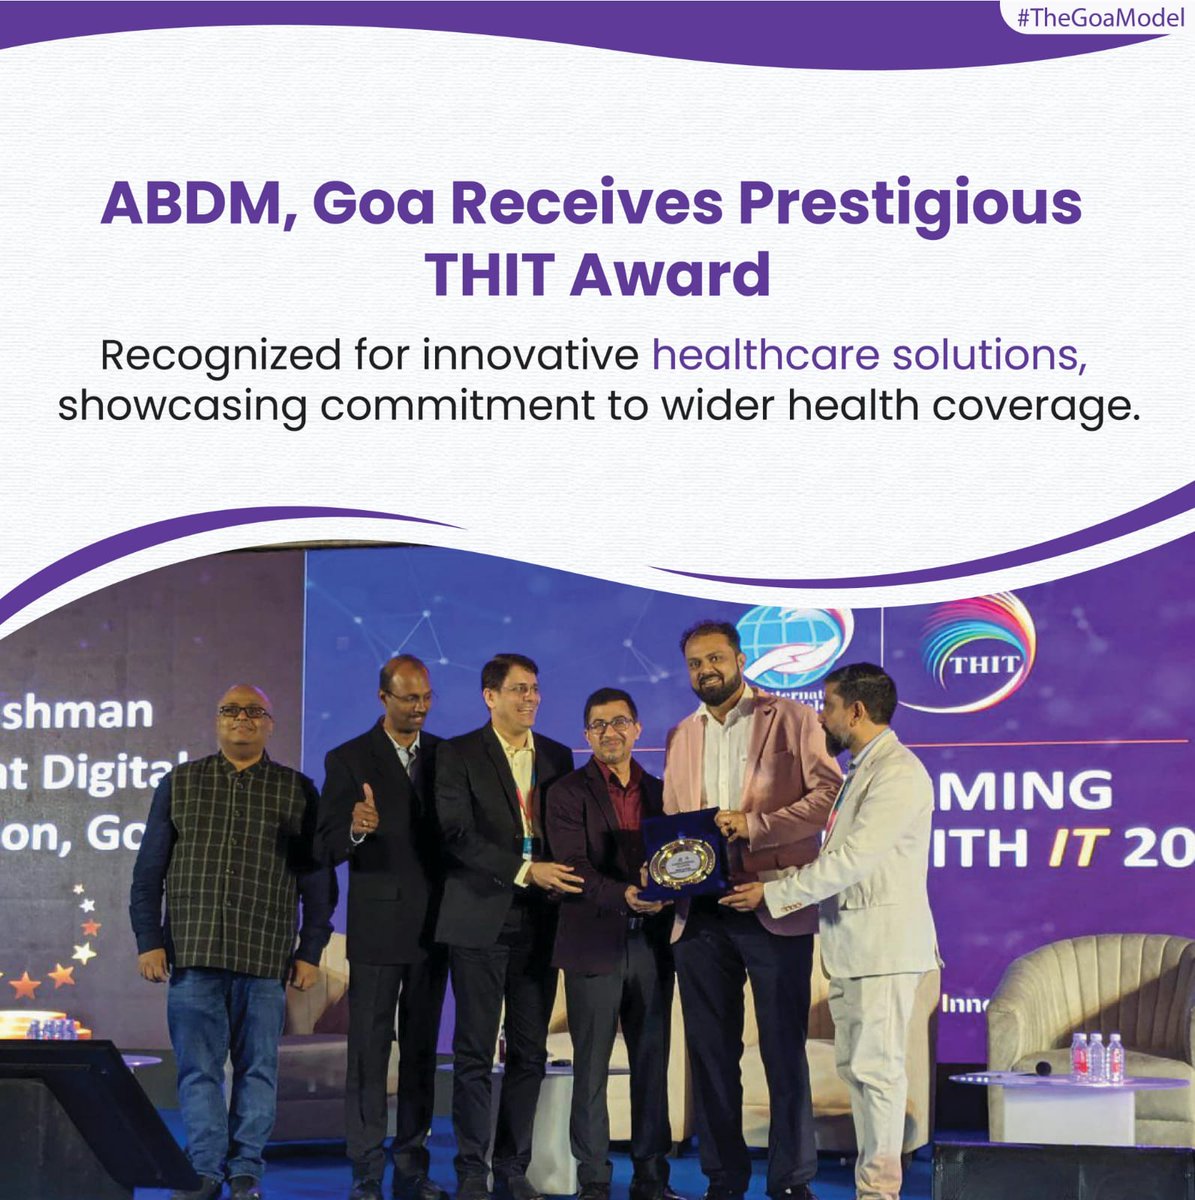 Goa's 'Digital Initiative at PHC Corlim' won 'The Best Rural Healthcare Project' award at THIT 2024, showcasing #TheGoaModel's commitment to innovative healthcare solutions and wider health coverage. #HealthcareInnovation 
#PHCCorlim #THIT2024 #GoaHealth #HealthTech